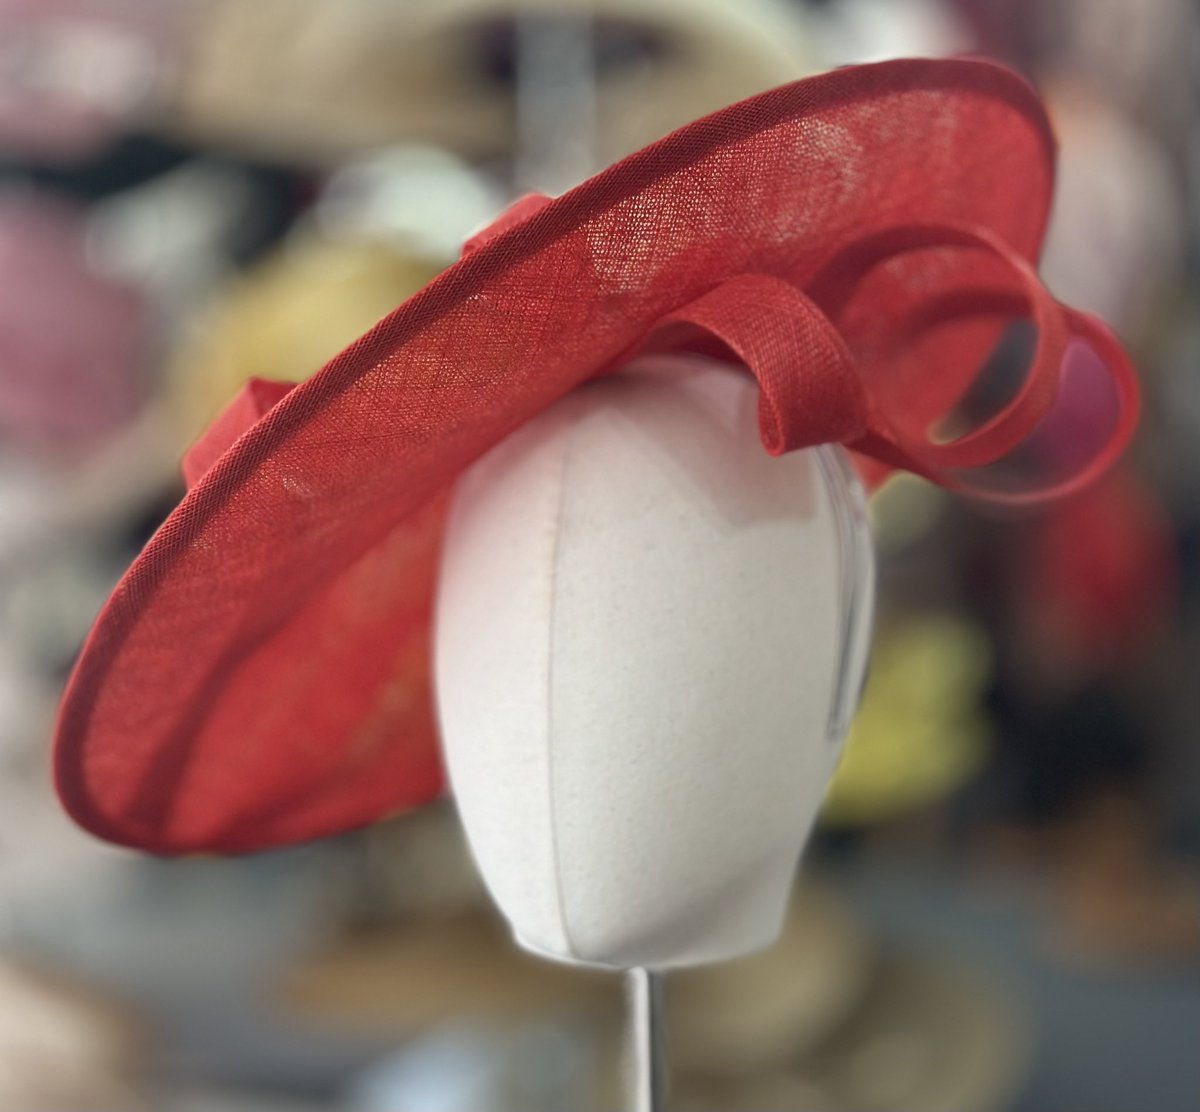 Hat of the Week
A large scarlet sinamay disc, finished with sinamay twists on top and underside.
Available to hire or purchase.
#hatoftheweek #discoftheweek  #hat #hats #disc #discs #hatshop #hathireshop #millinery #scarlet #red #wallingforduk #louiseclairemillinery